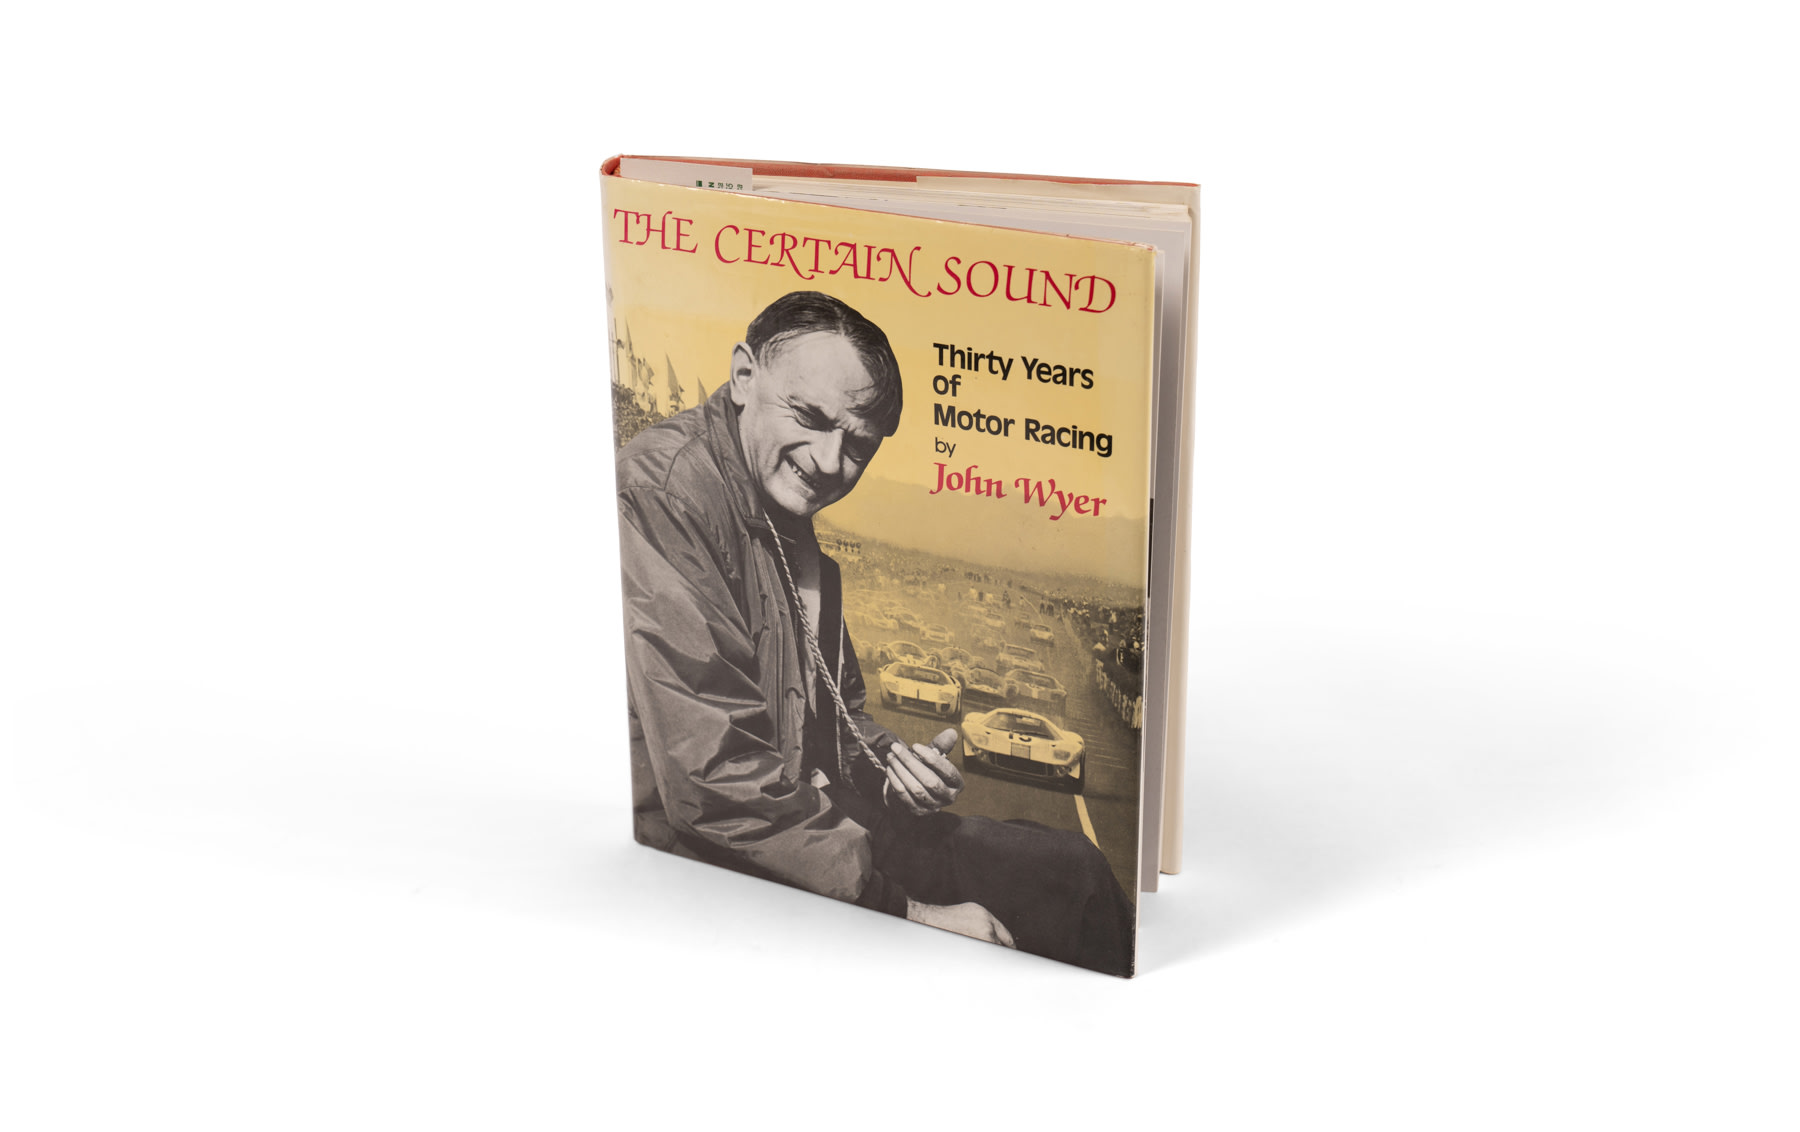 The Certain Sound: Thirty Years of Motor Racing by John Wyer